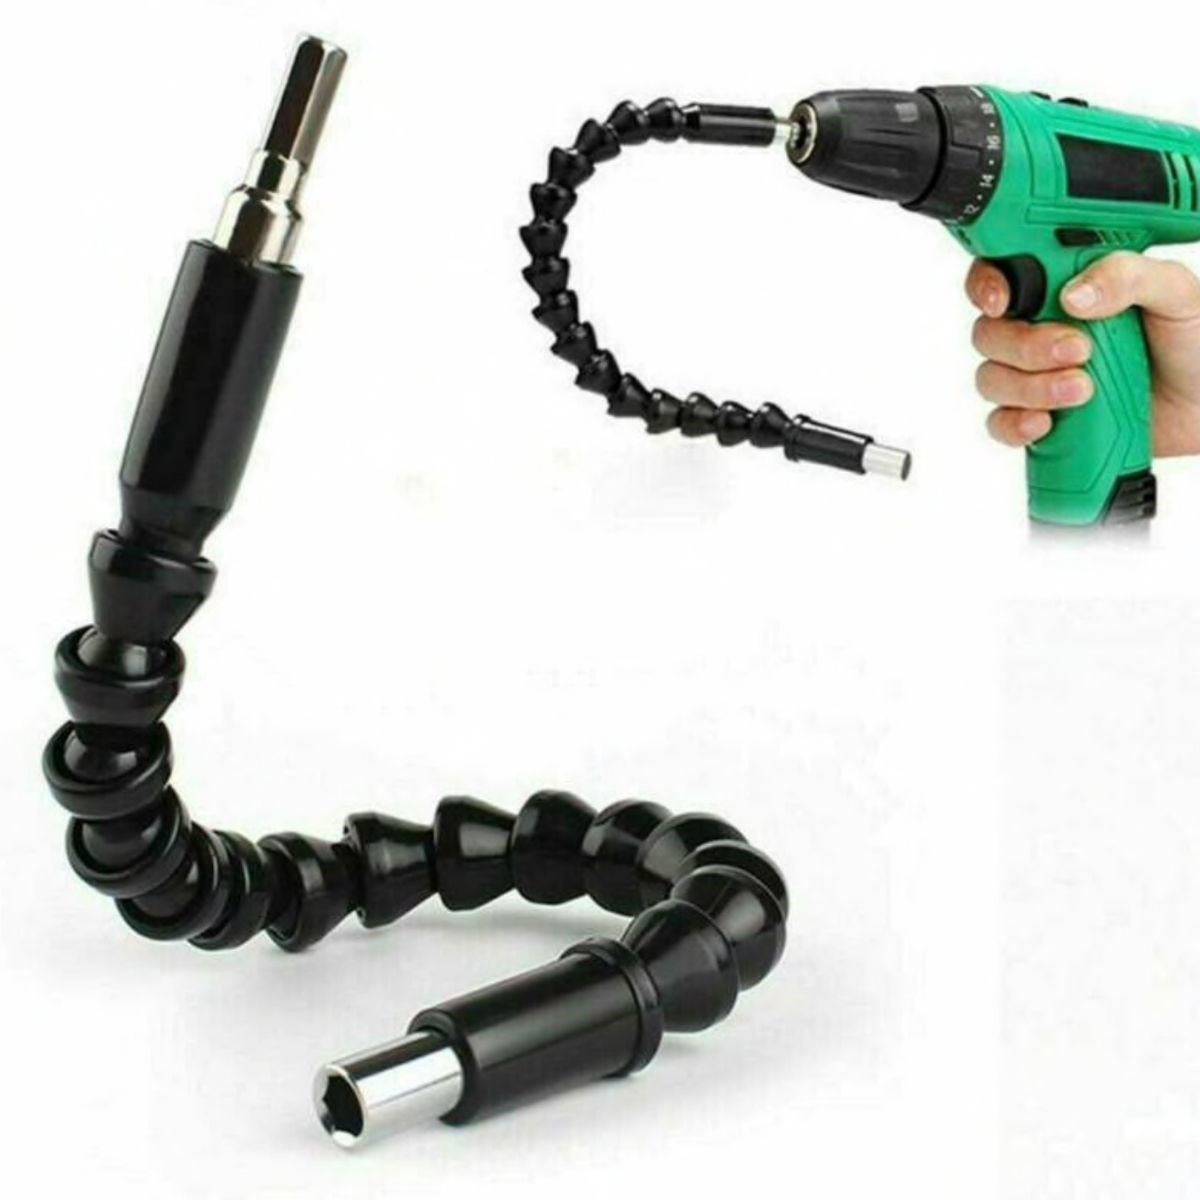 29cm Flexible Extension Bit holder Tool with Magnet For Screwdriver Drill UK 